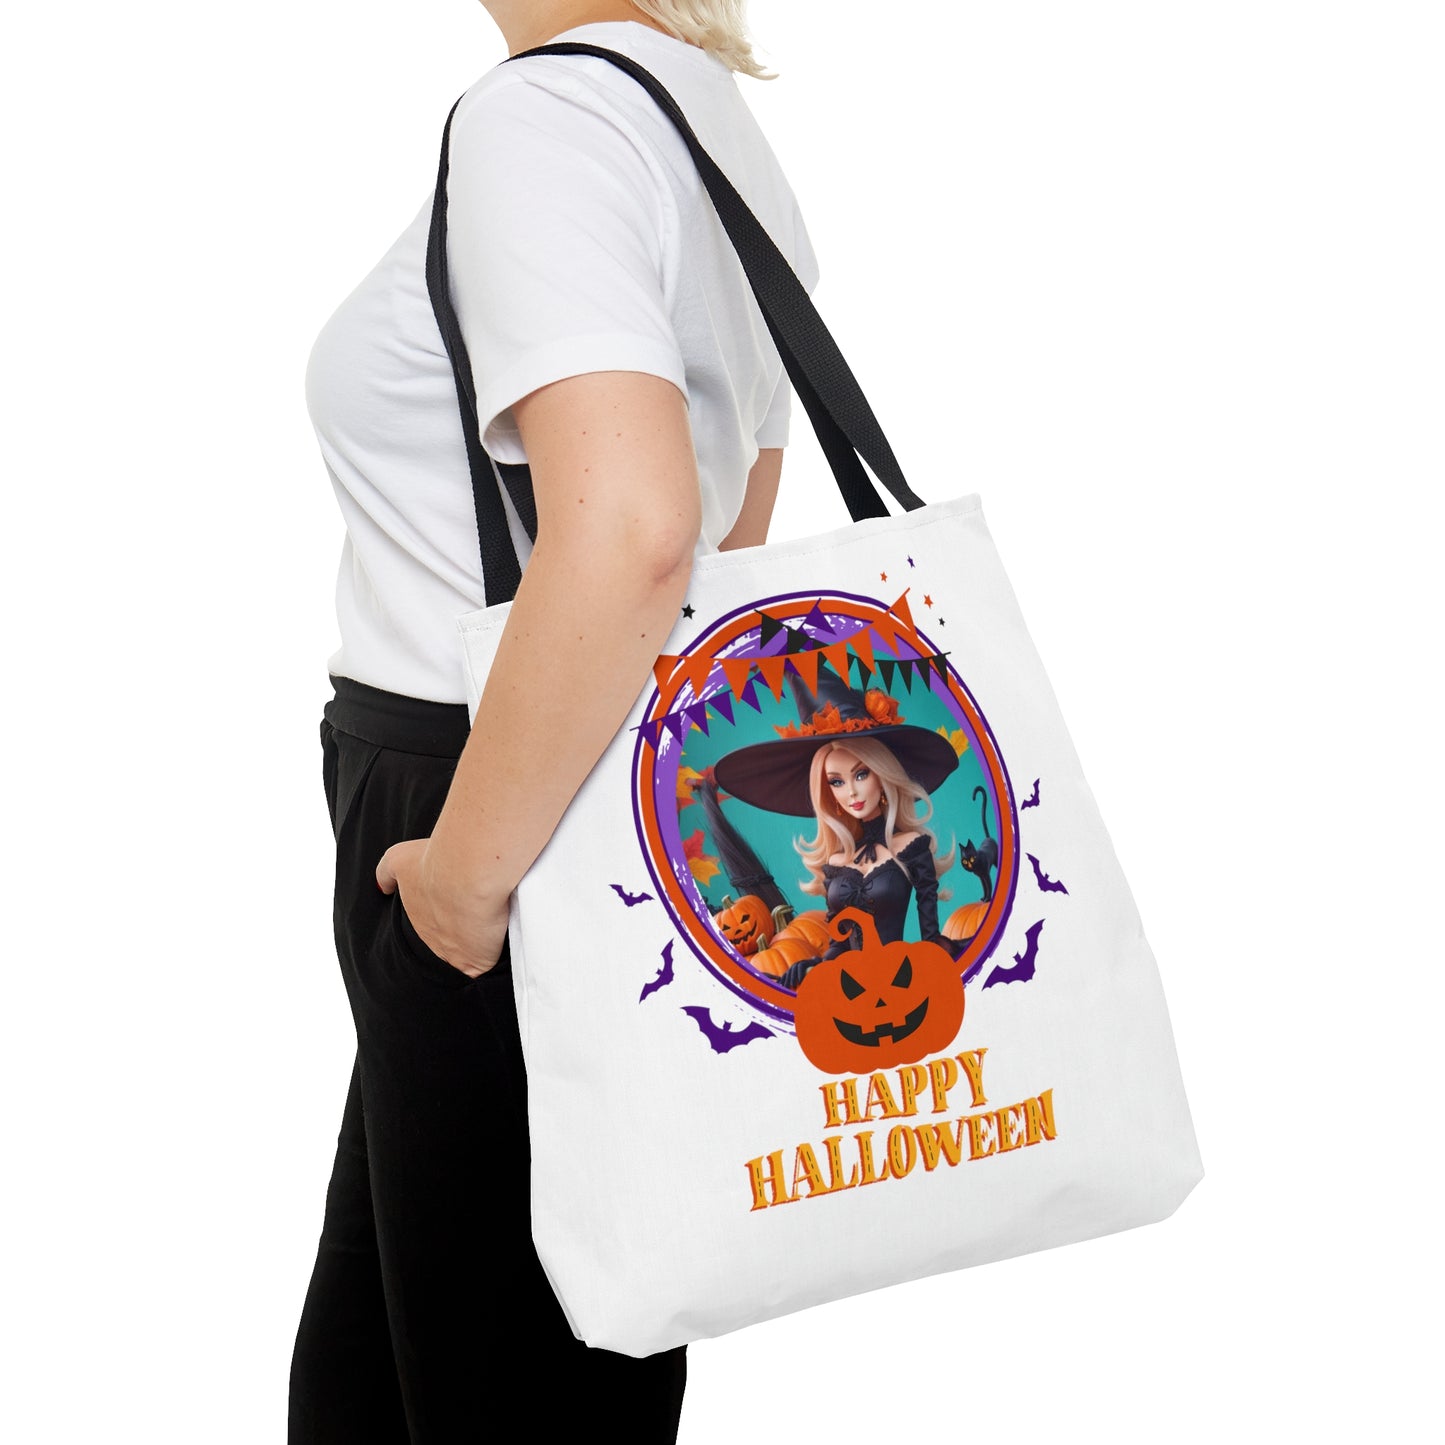 Tote Bag - Halloween - Barbie witch - 01